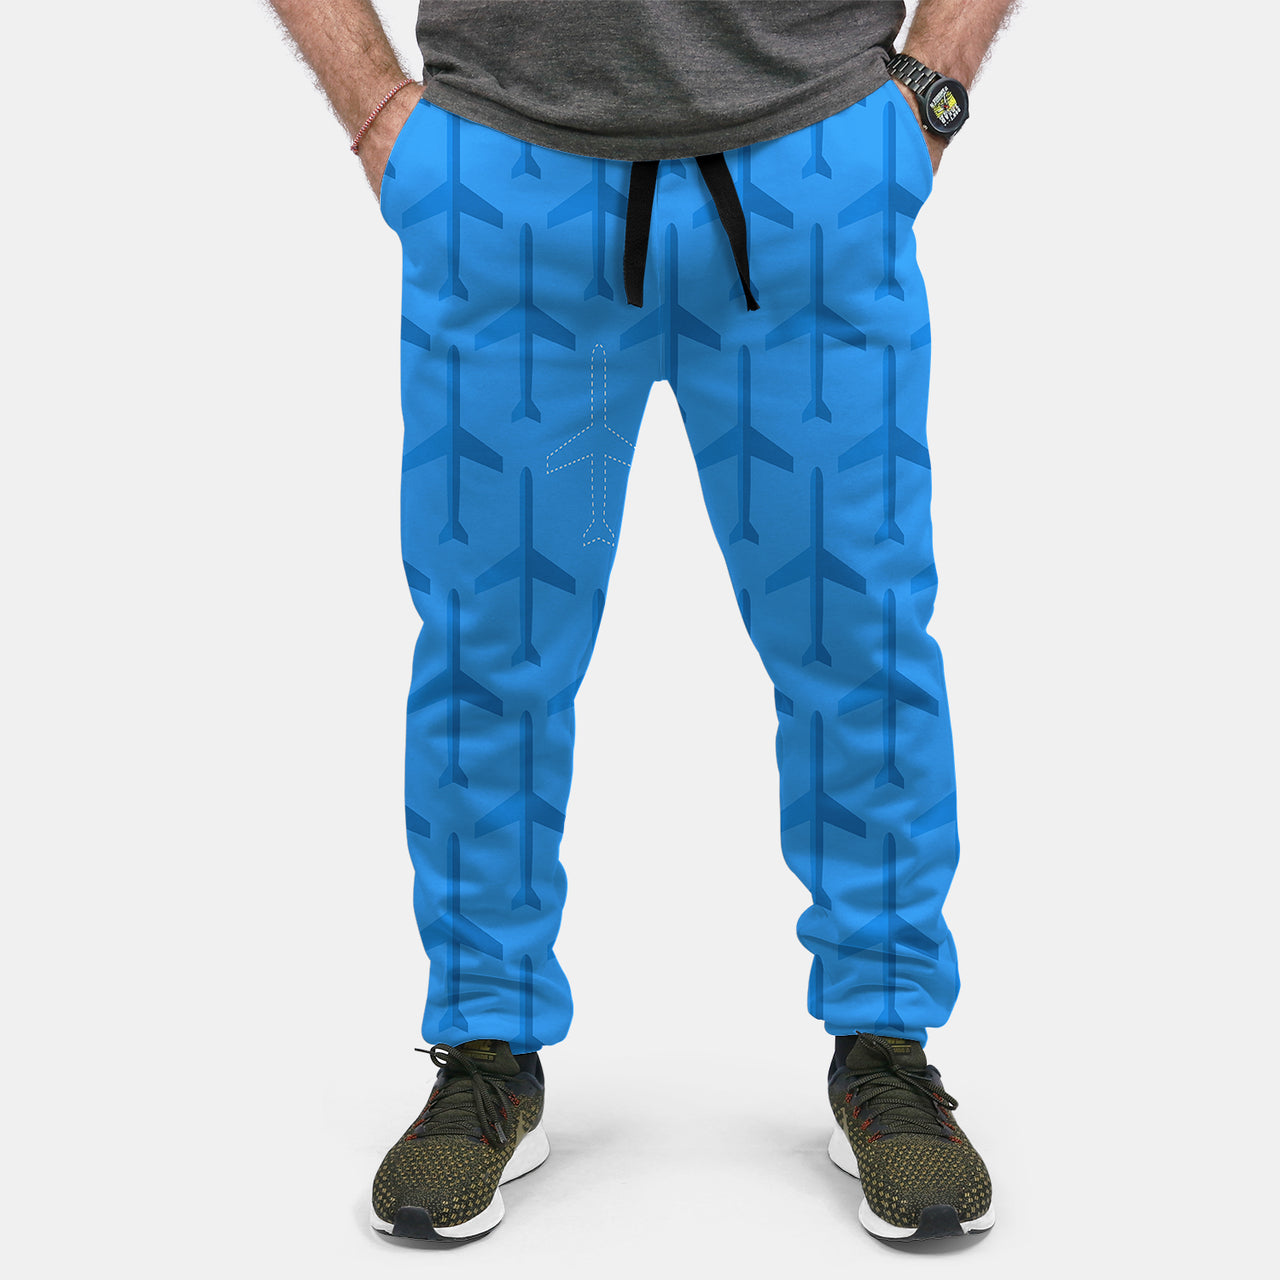 Blue Seamless Airplanes Designed Sweat Pants & Trousers